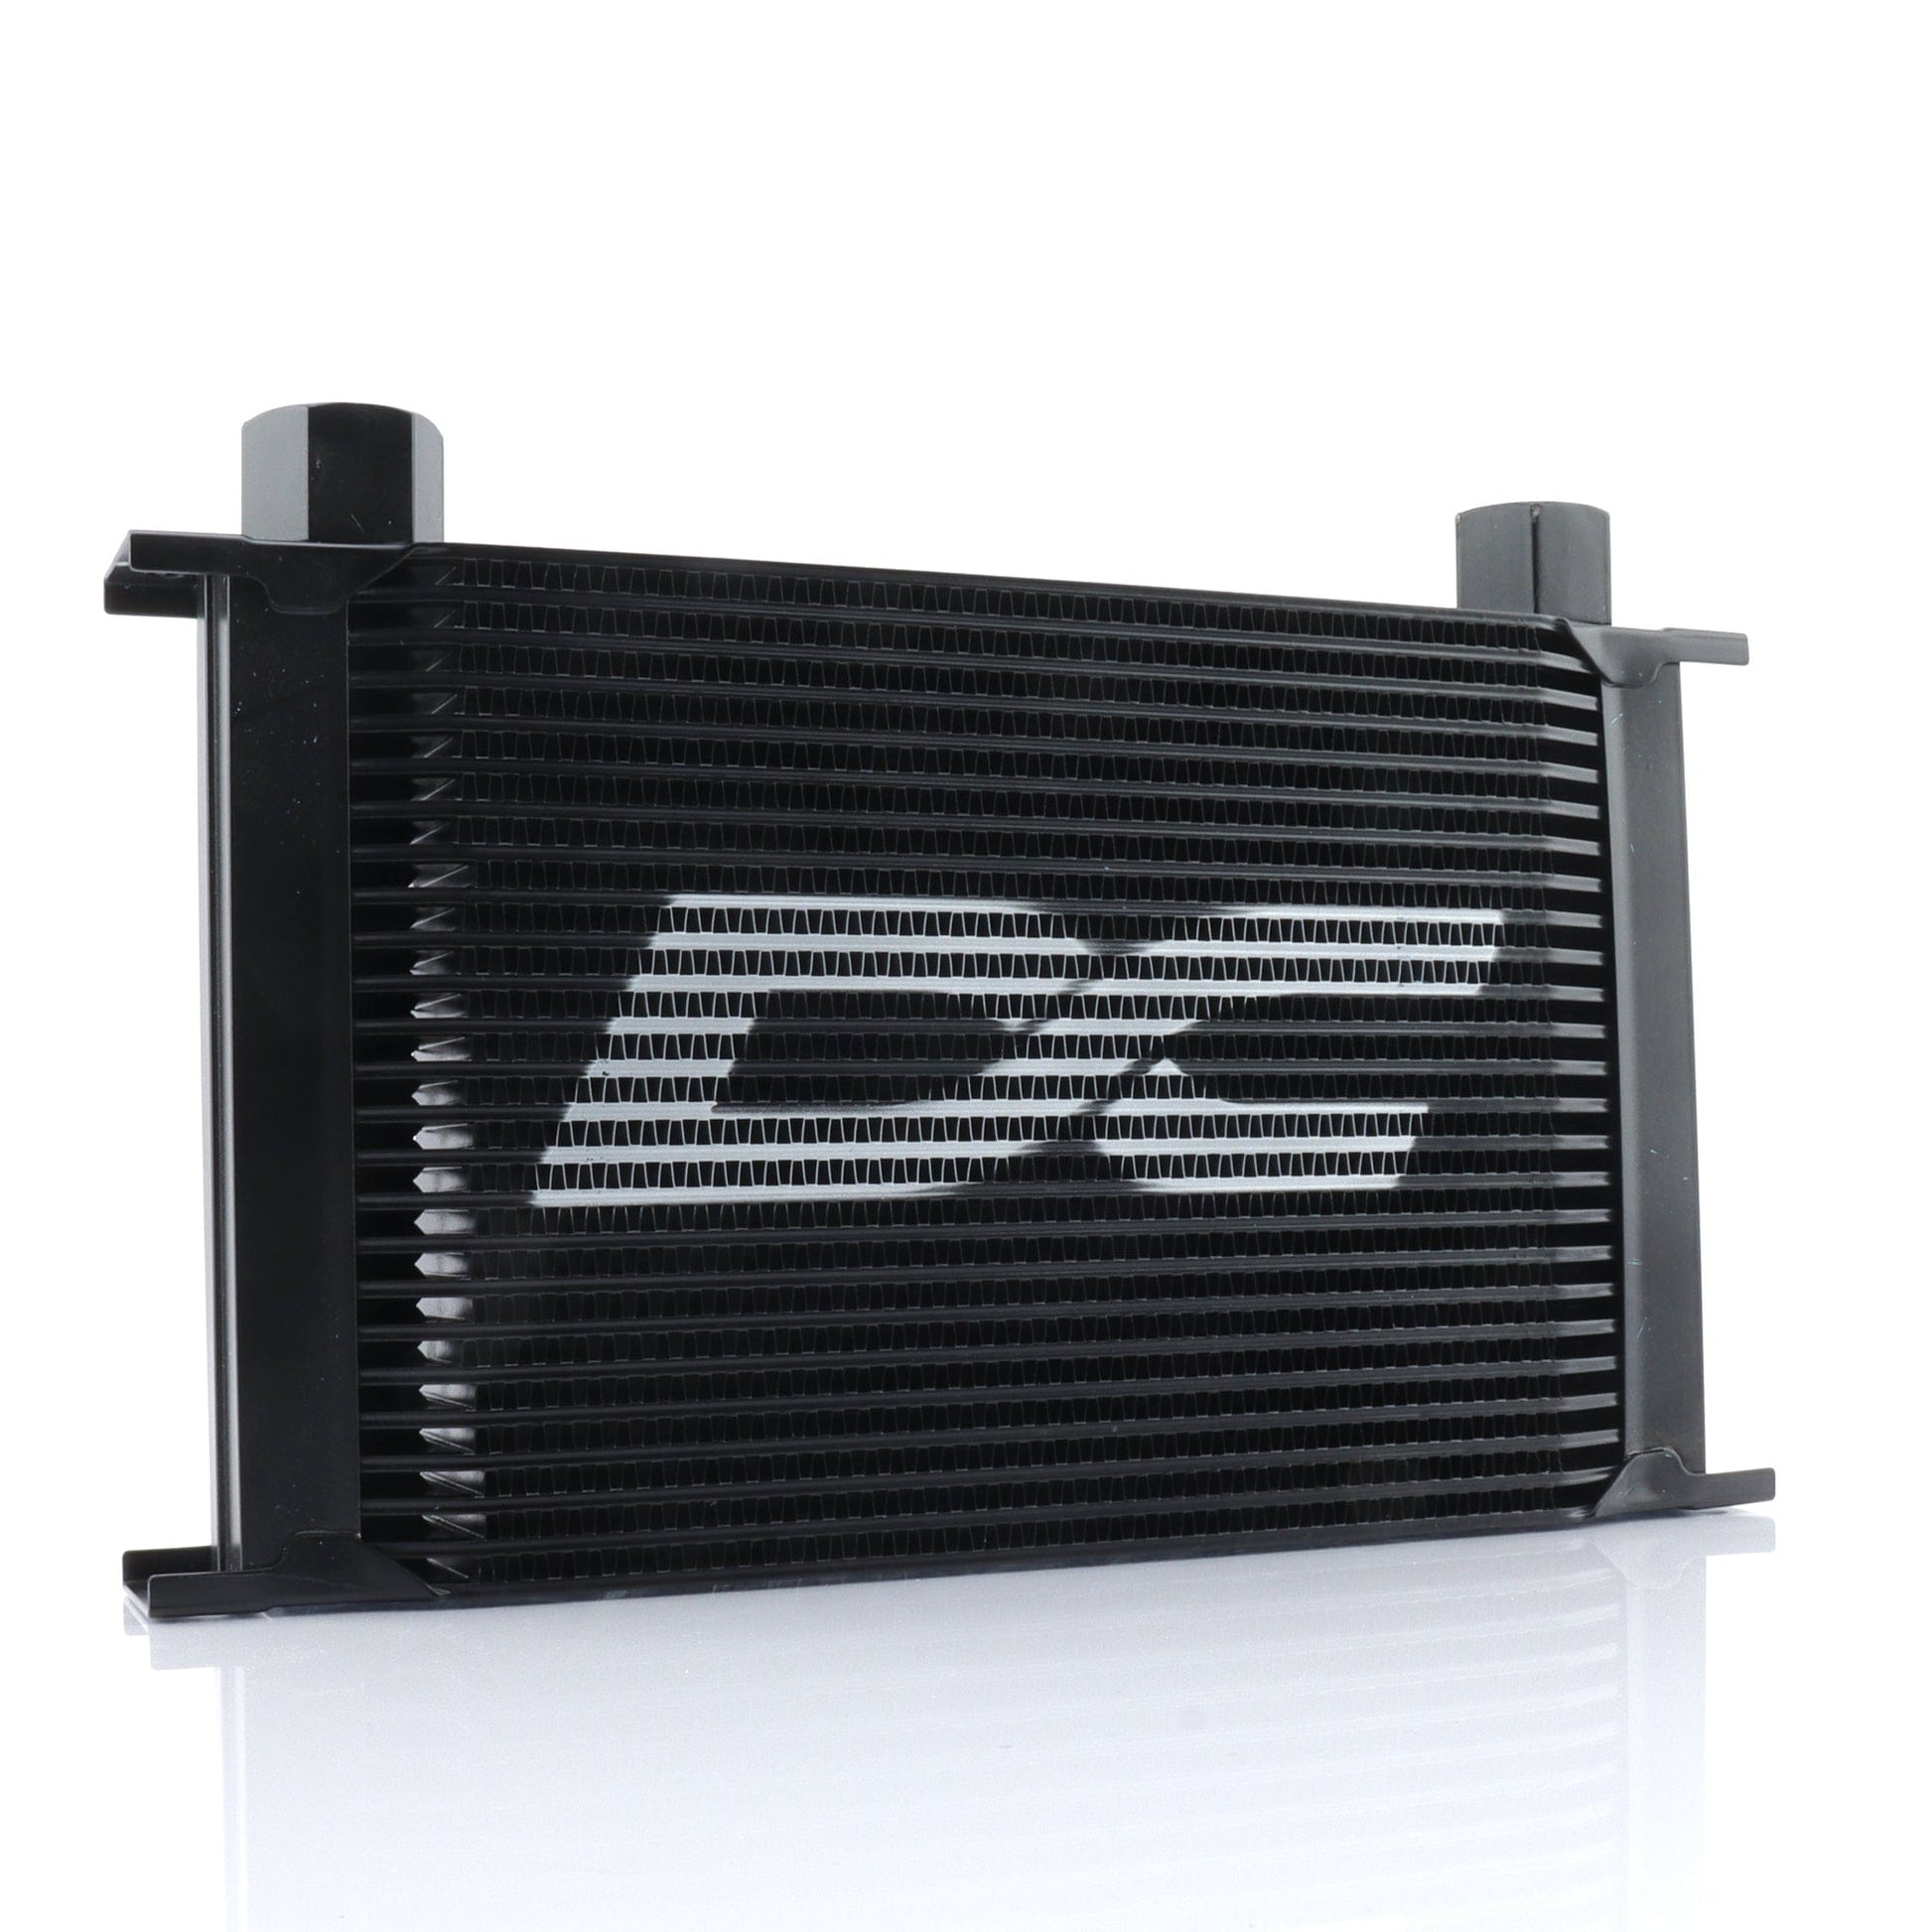 DC Sports Oil Cooler No Fittings DC SPORTS 25 ROW UNIVERSAL OIL COOLER; BLACK